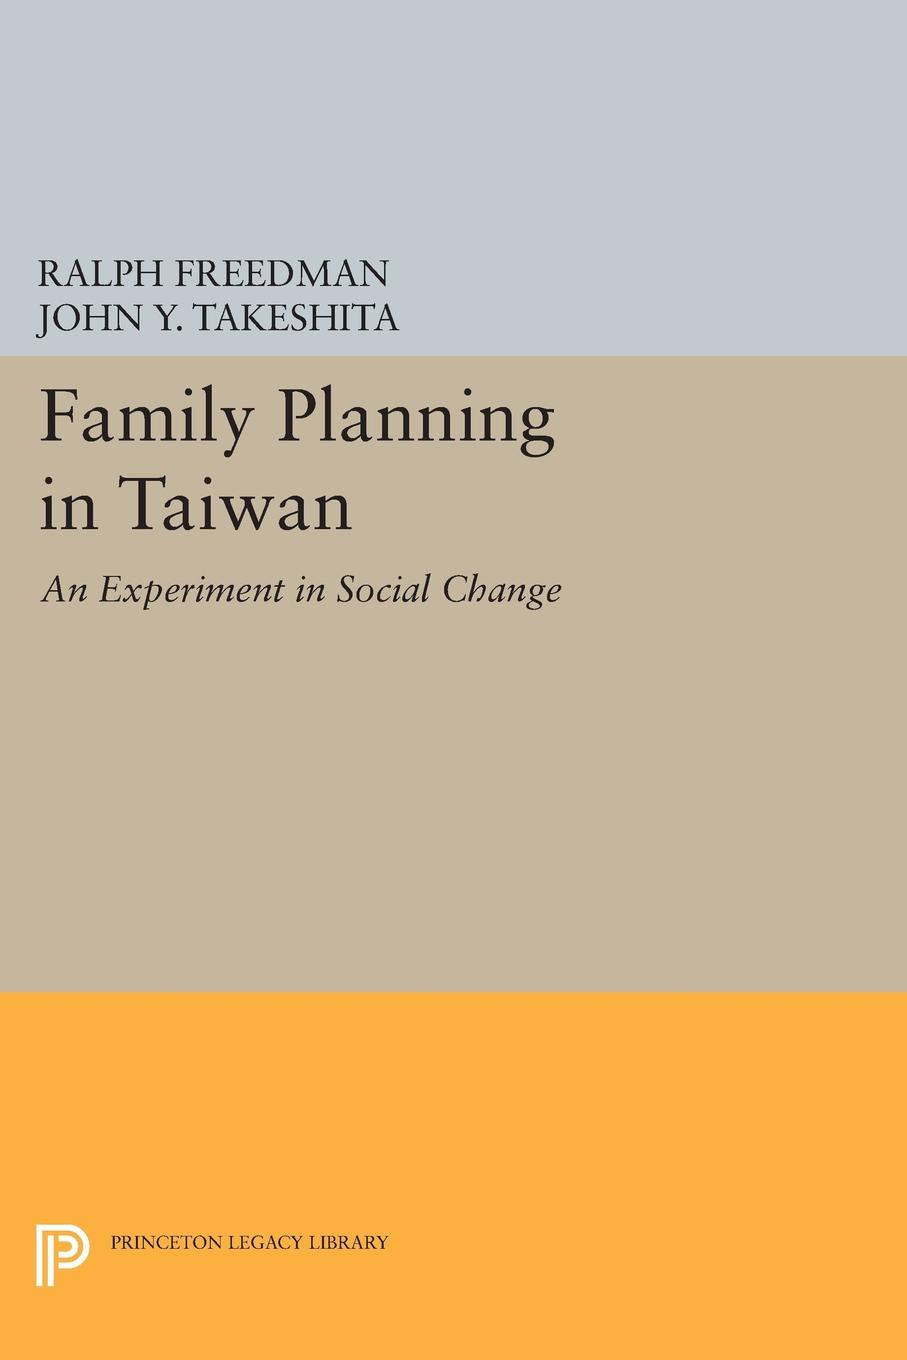 Family Planning in Taiwan. An Experiment in Social Change